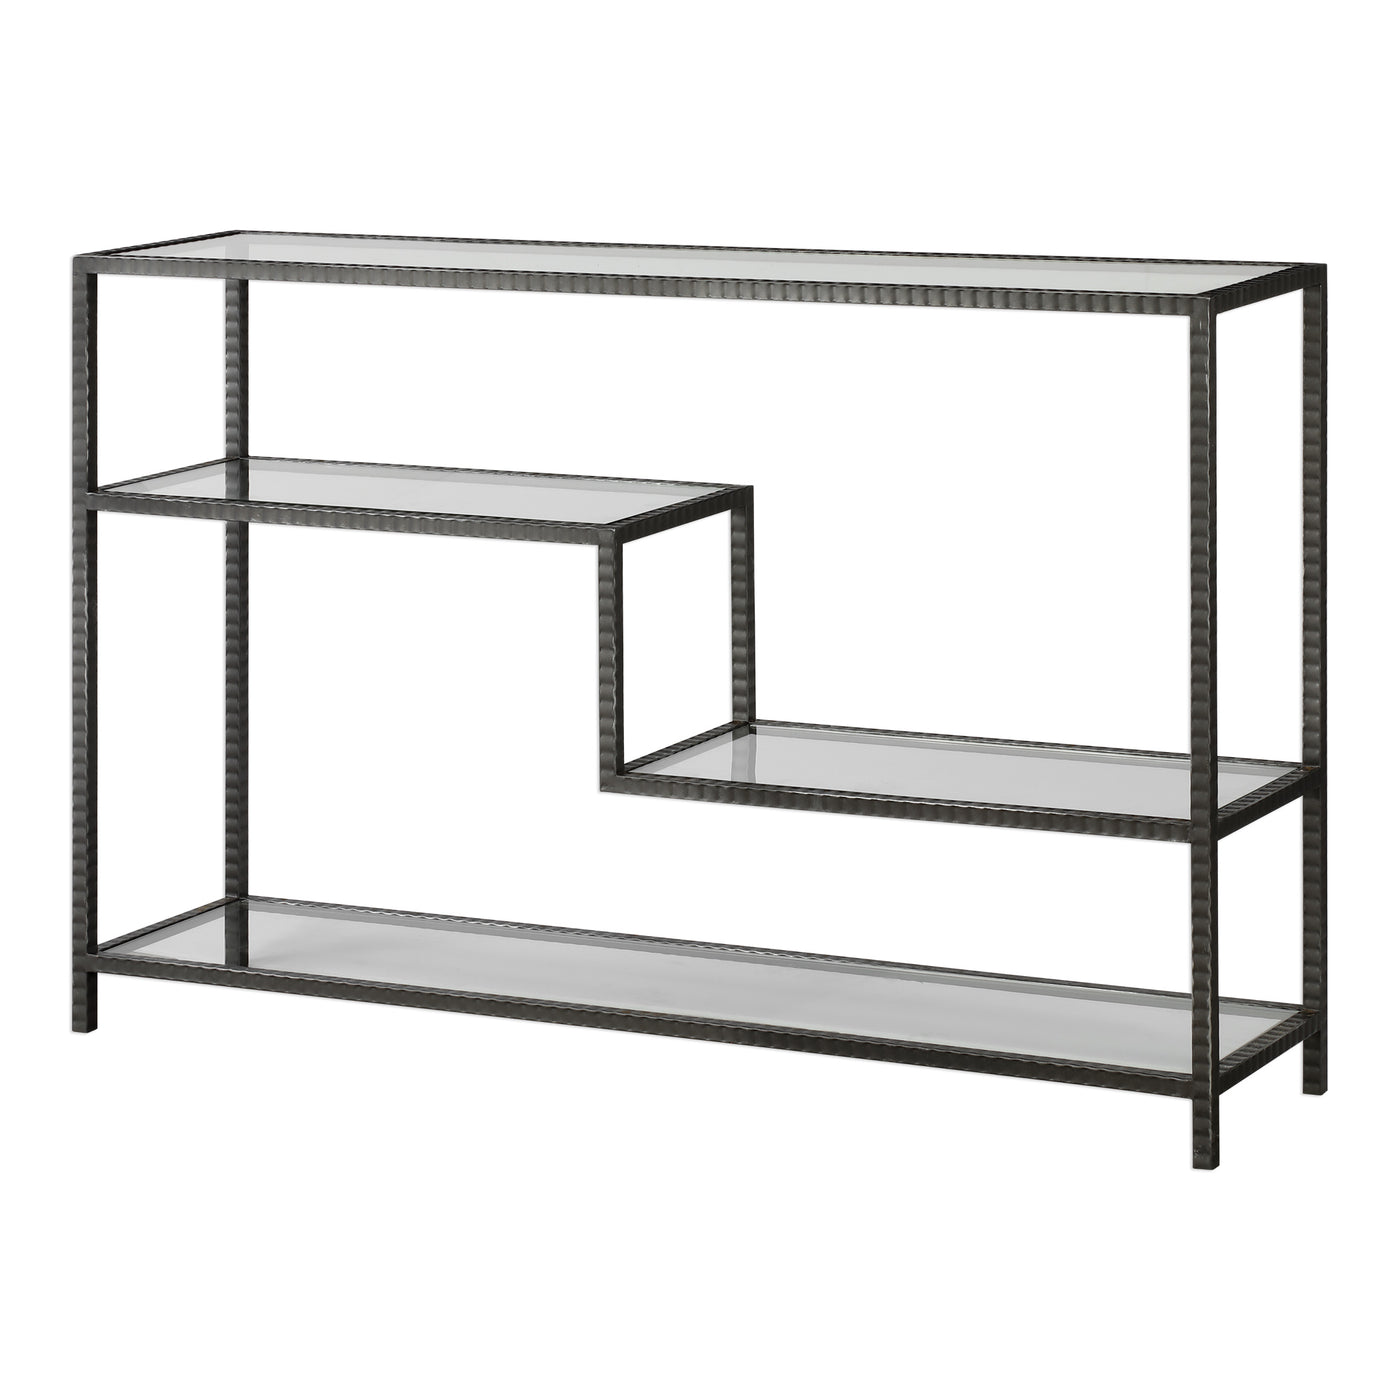 Industrial Inspired Function With Multi-level Display Shelves, Featuring Ribbed Iron Finished In An Aged Gunmetal With A L...